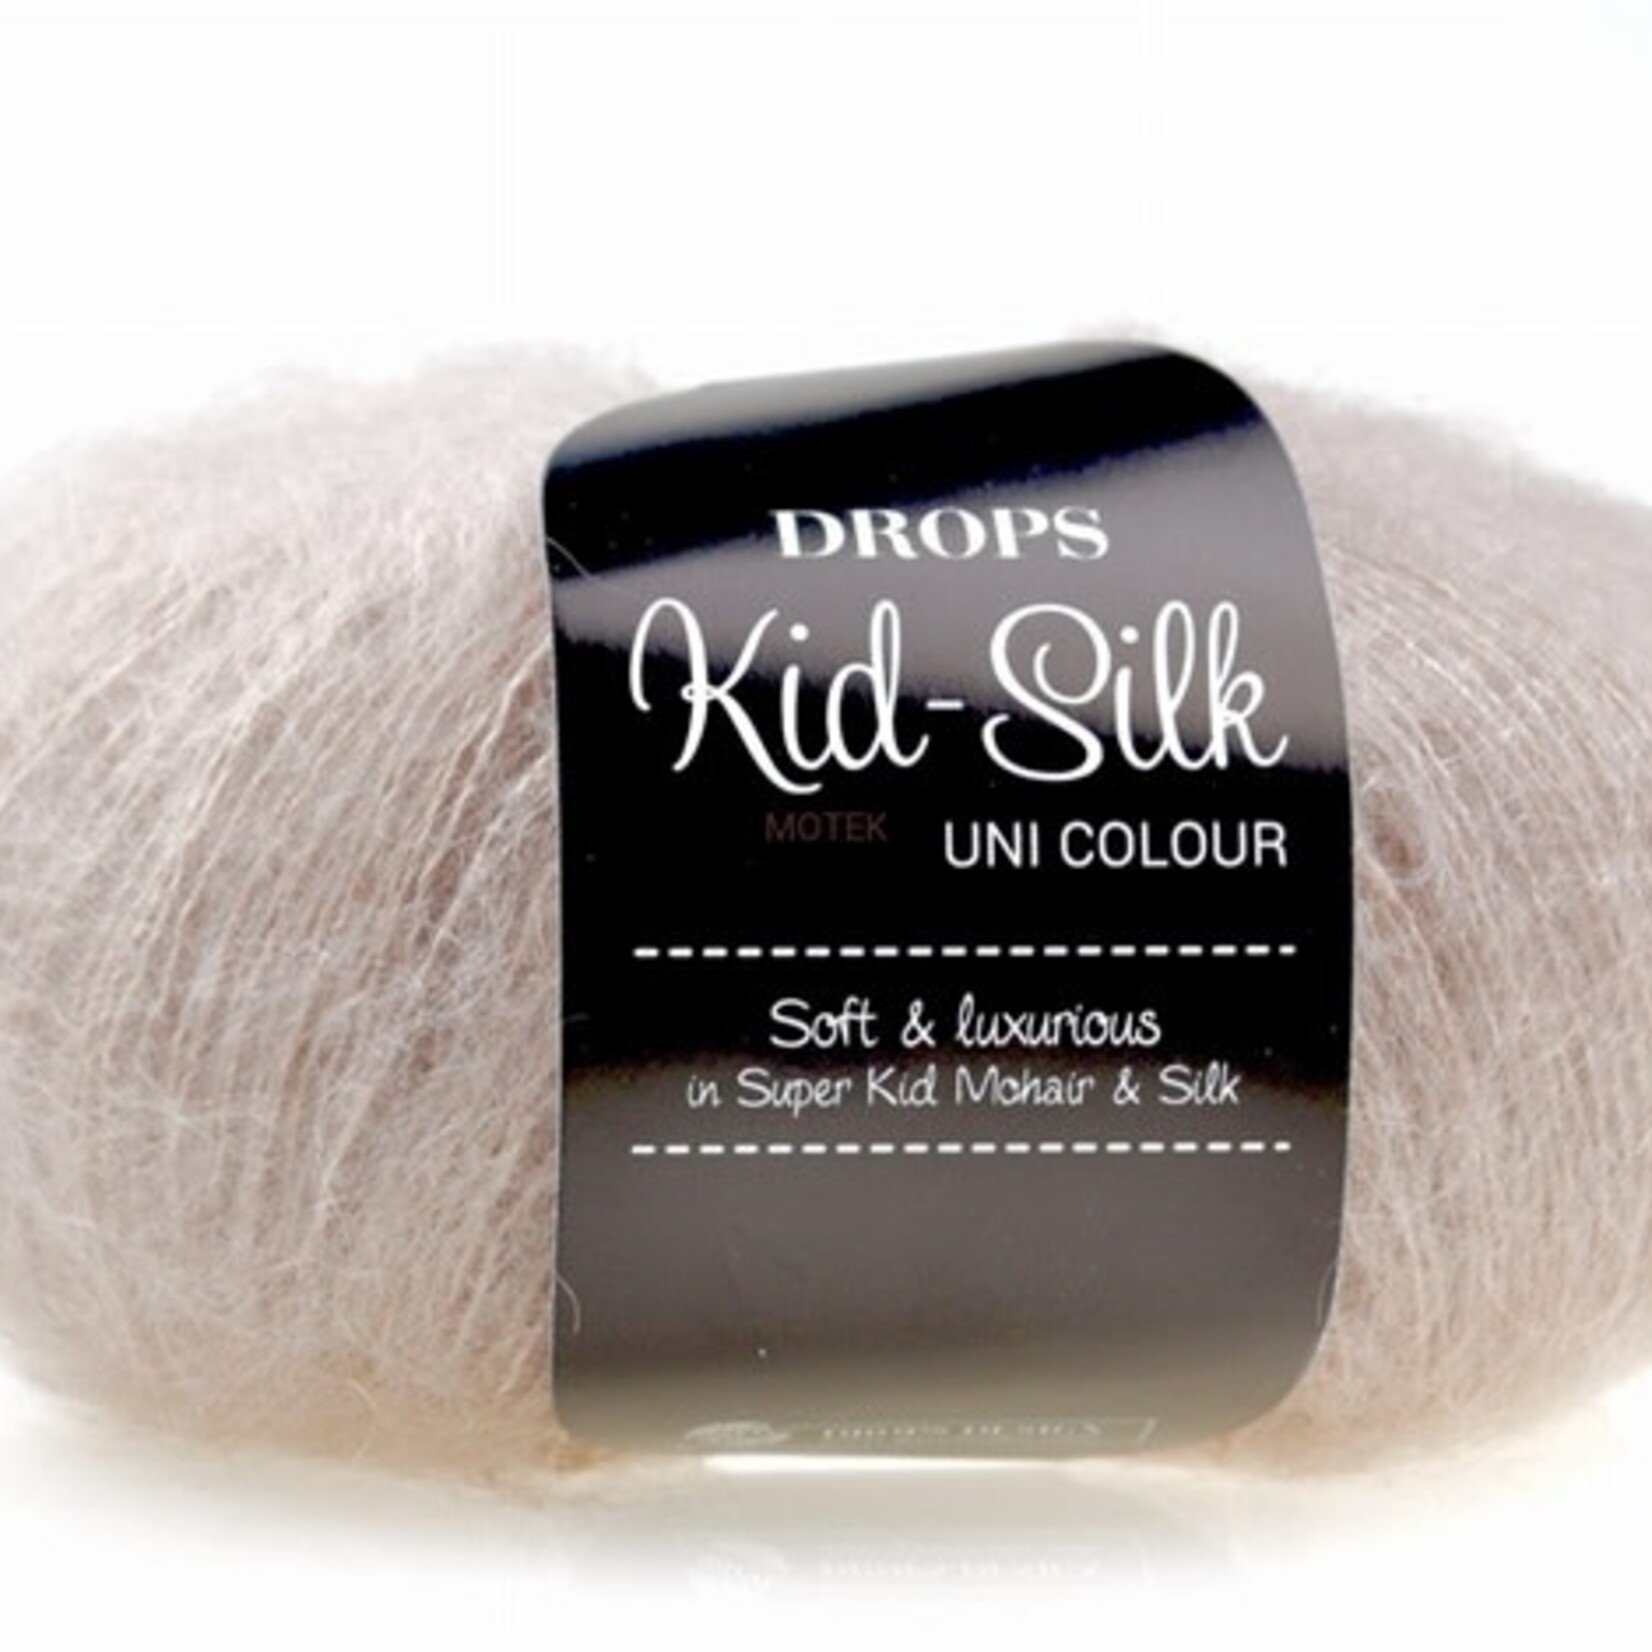 Kid Silk Uni Colour by Drops - Wool Trends